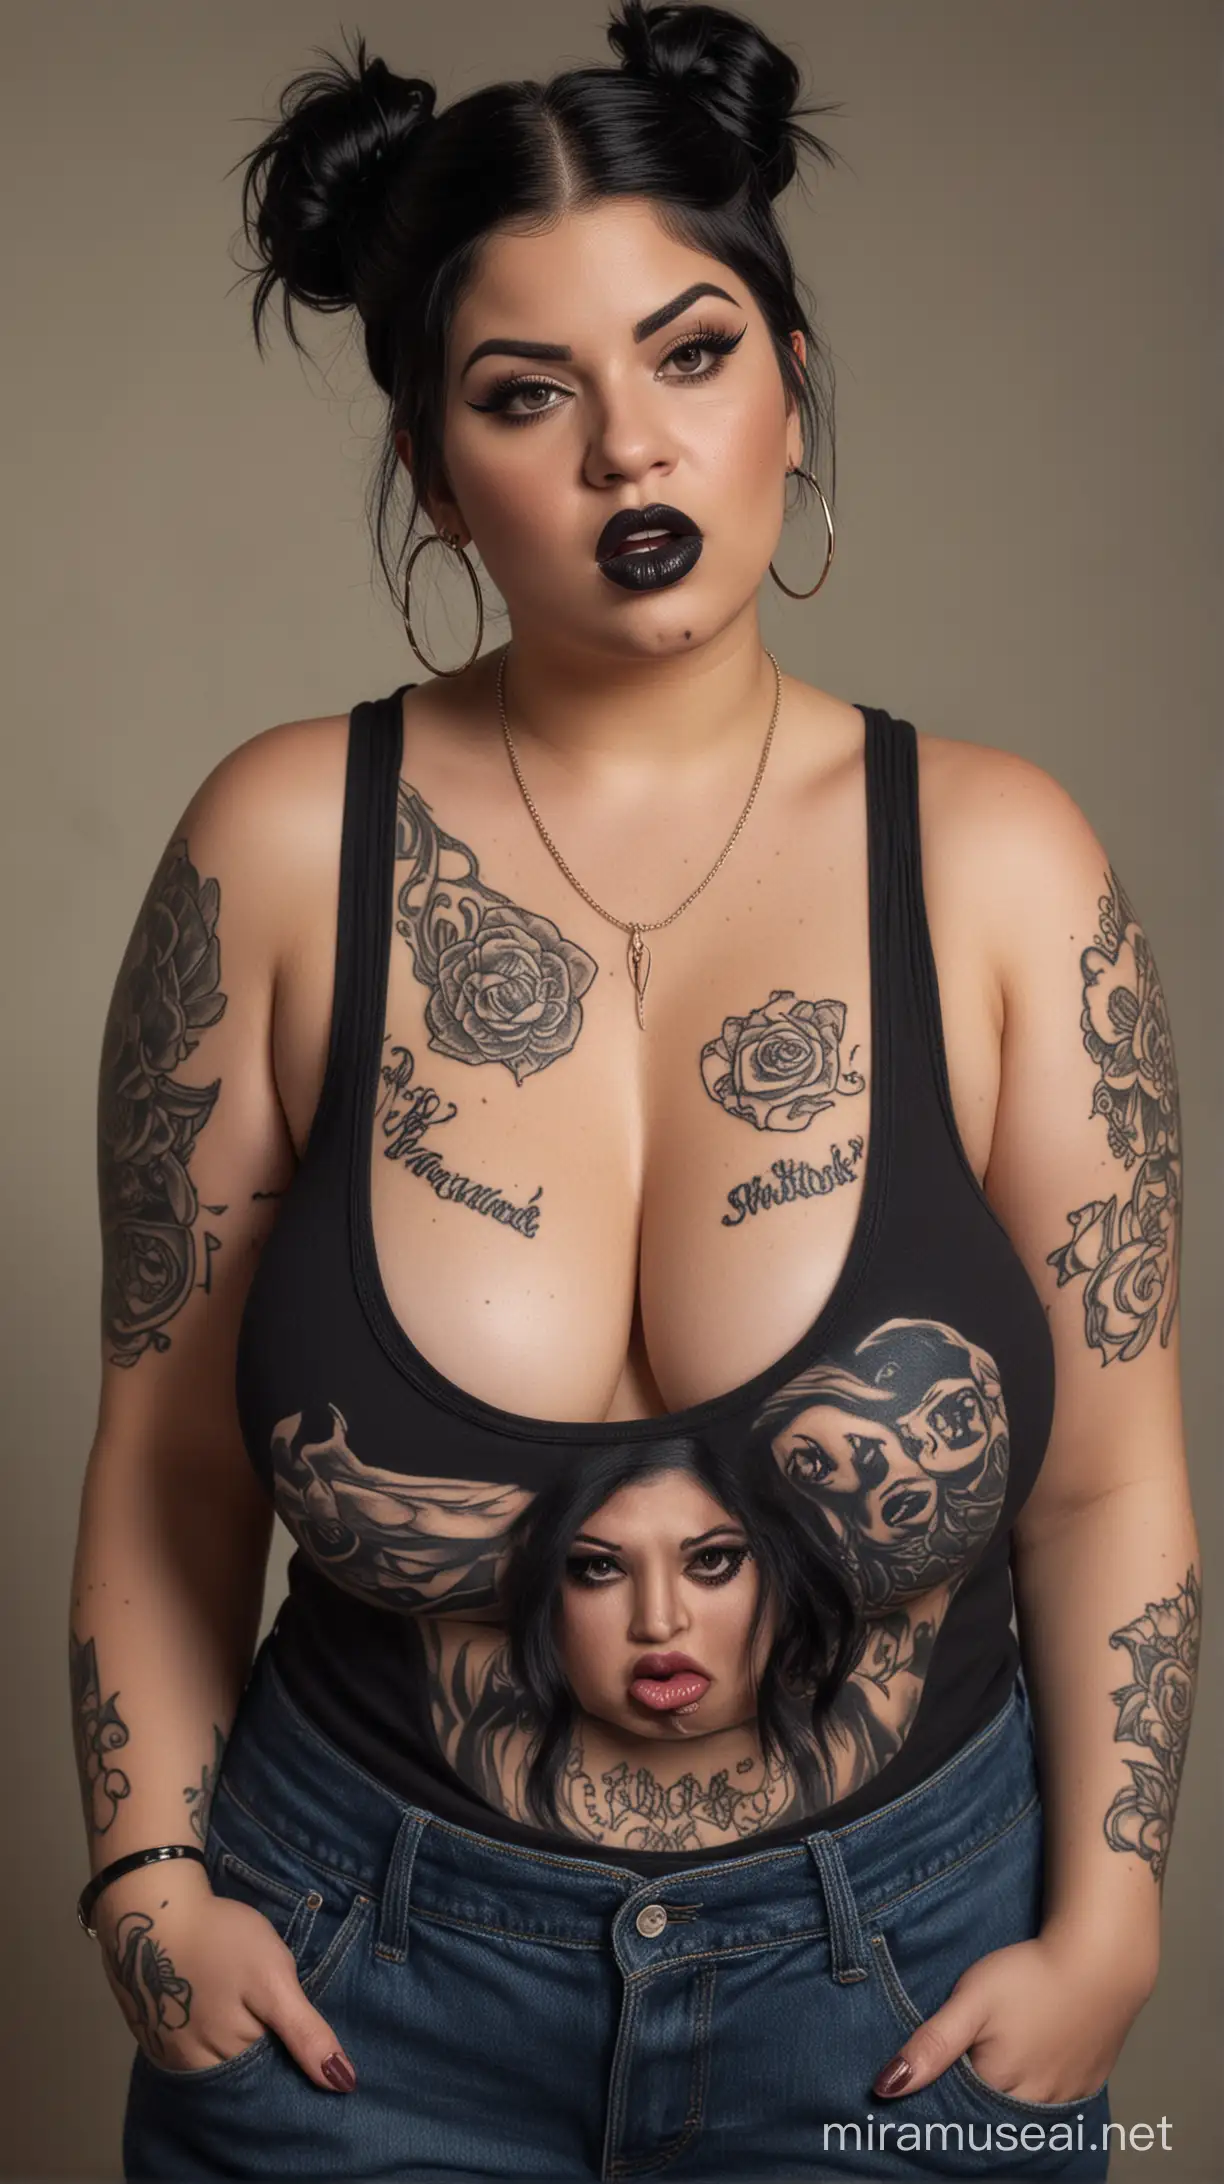 photo realistic, full body, obese, Beautiful woman, BLACK lipstick, hoop earrings, angry expression, black hair, tattoos, chola, black tank top, renaissance style,